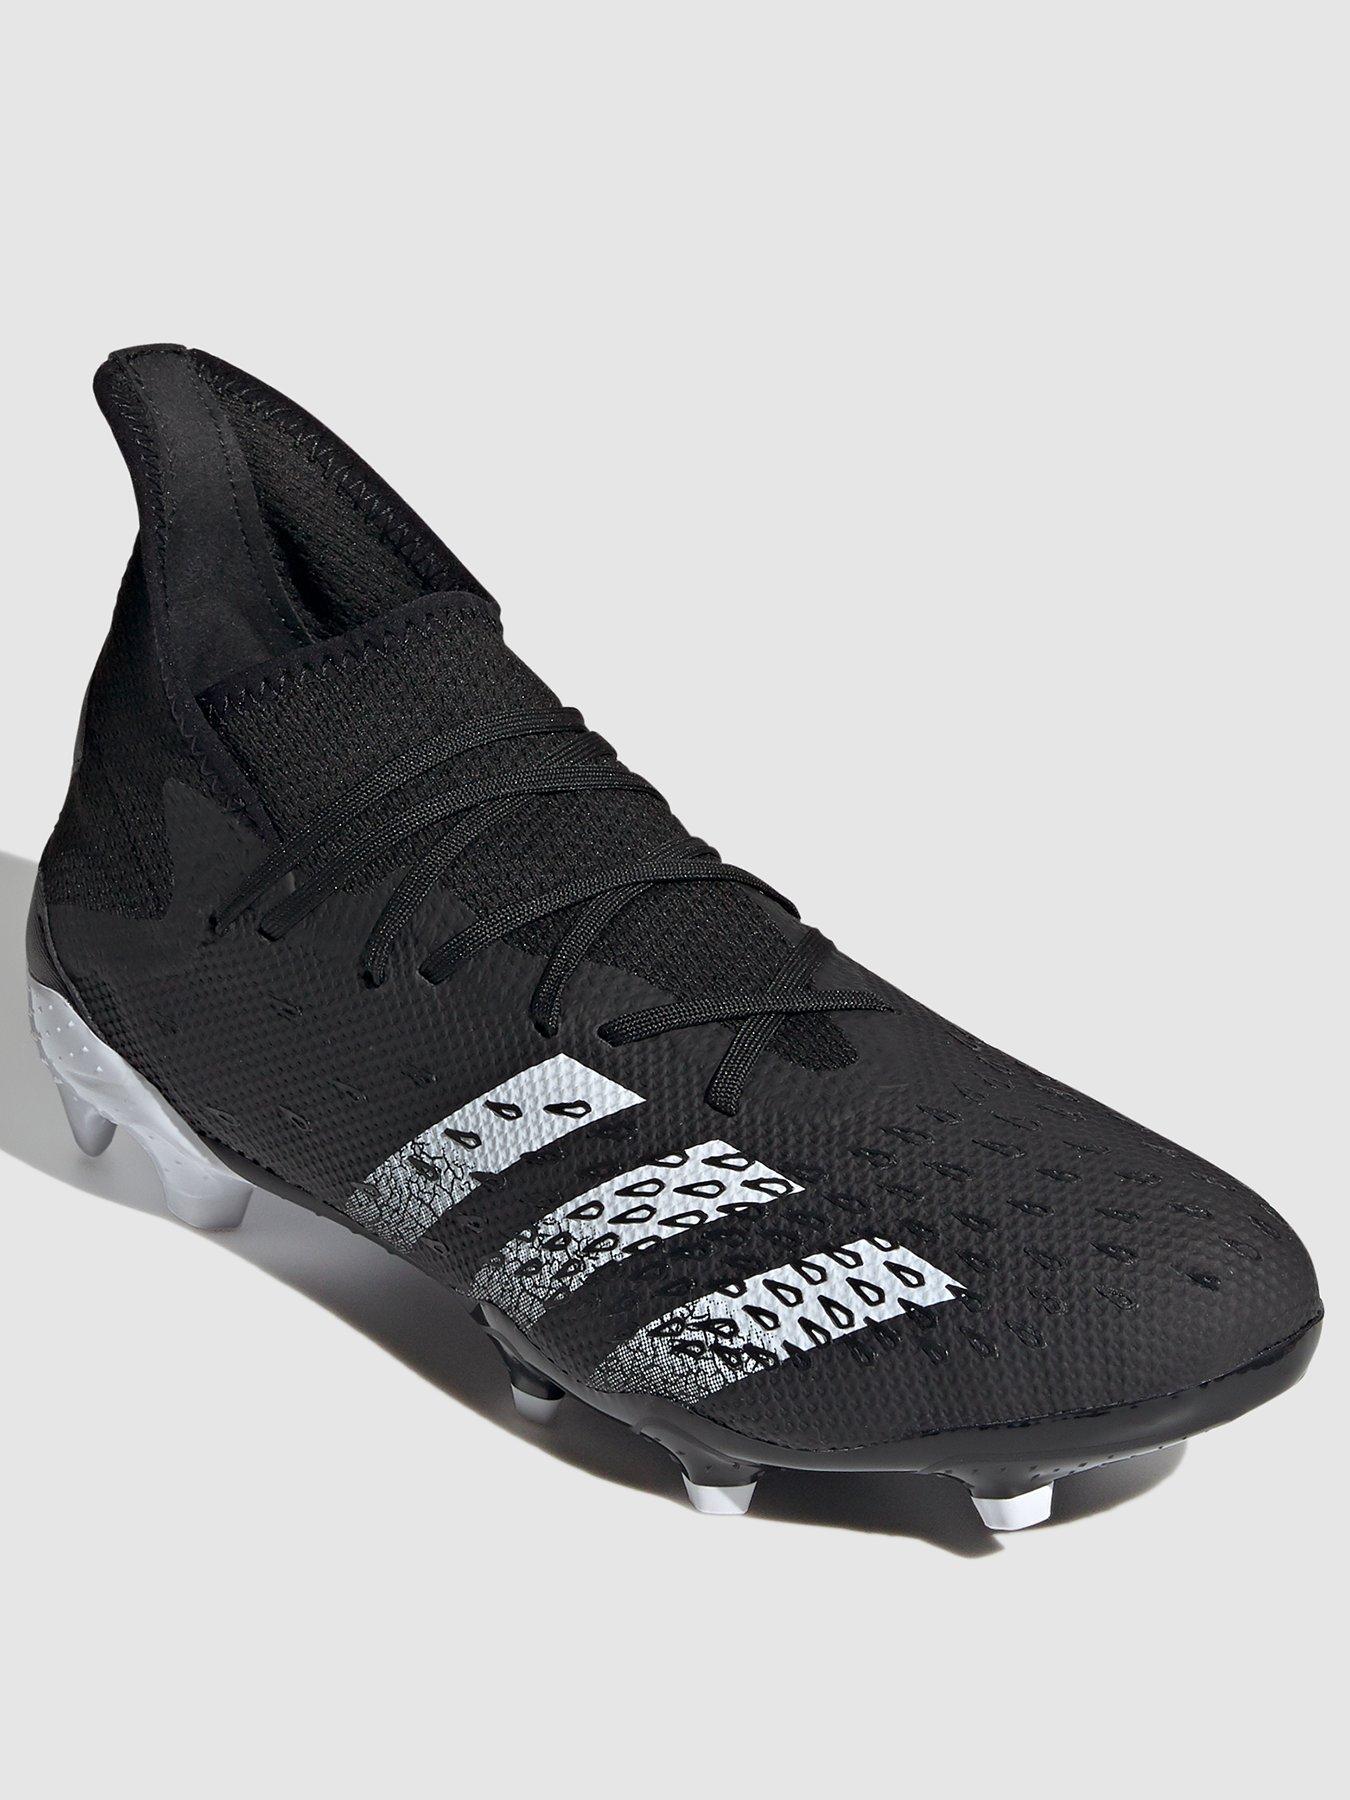 Mens Football Boots | Football Trainers 